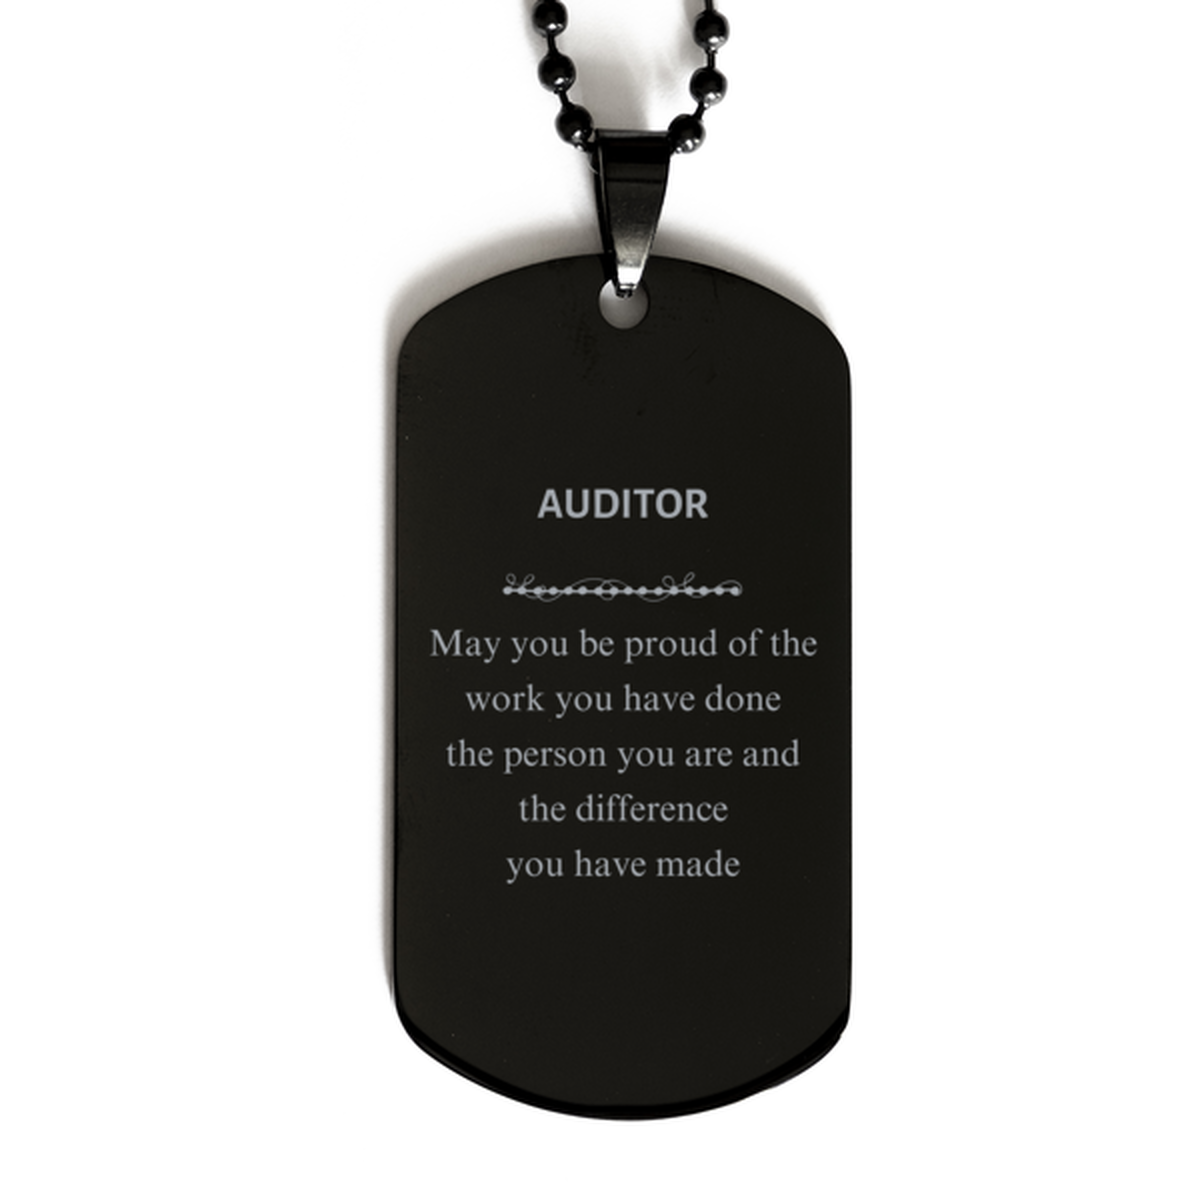 Auditor May you be proud of the work you have done, Retirement Auditor Black Dog Tag for Colleague Appreciation Gifts Amazing for Auditor